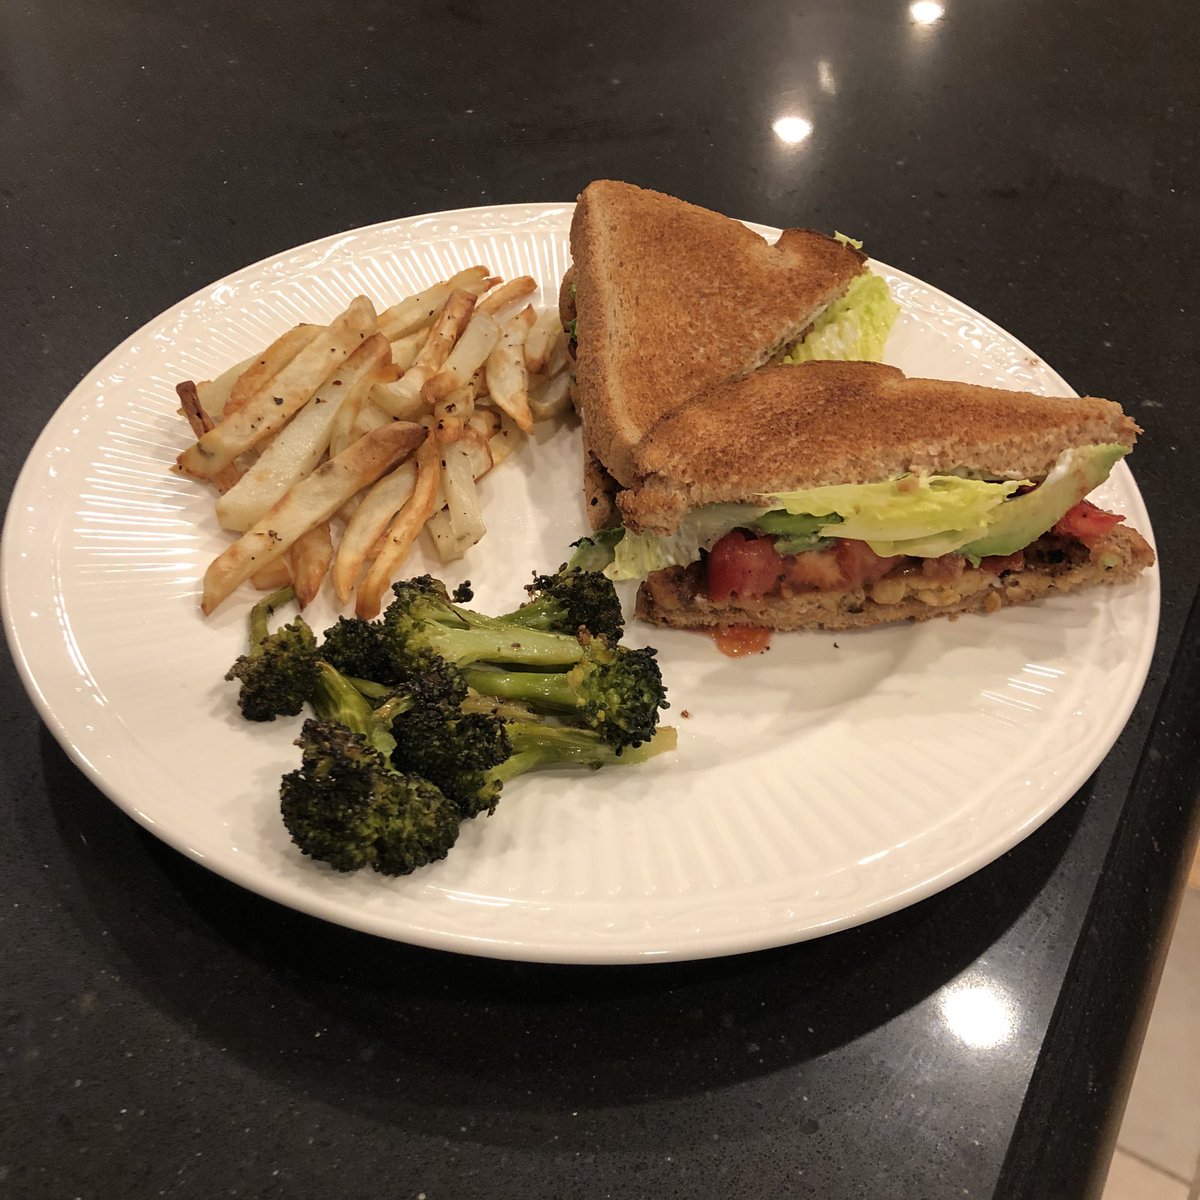 Last night’s dinner BLT’s with homemade tempeh bacon, roasted broccoli, homemade fries. We are staying with Sarah’s mom and she has an air fryer, it rules.